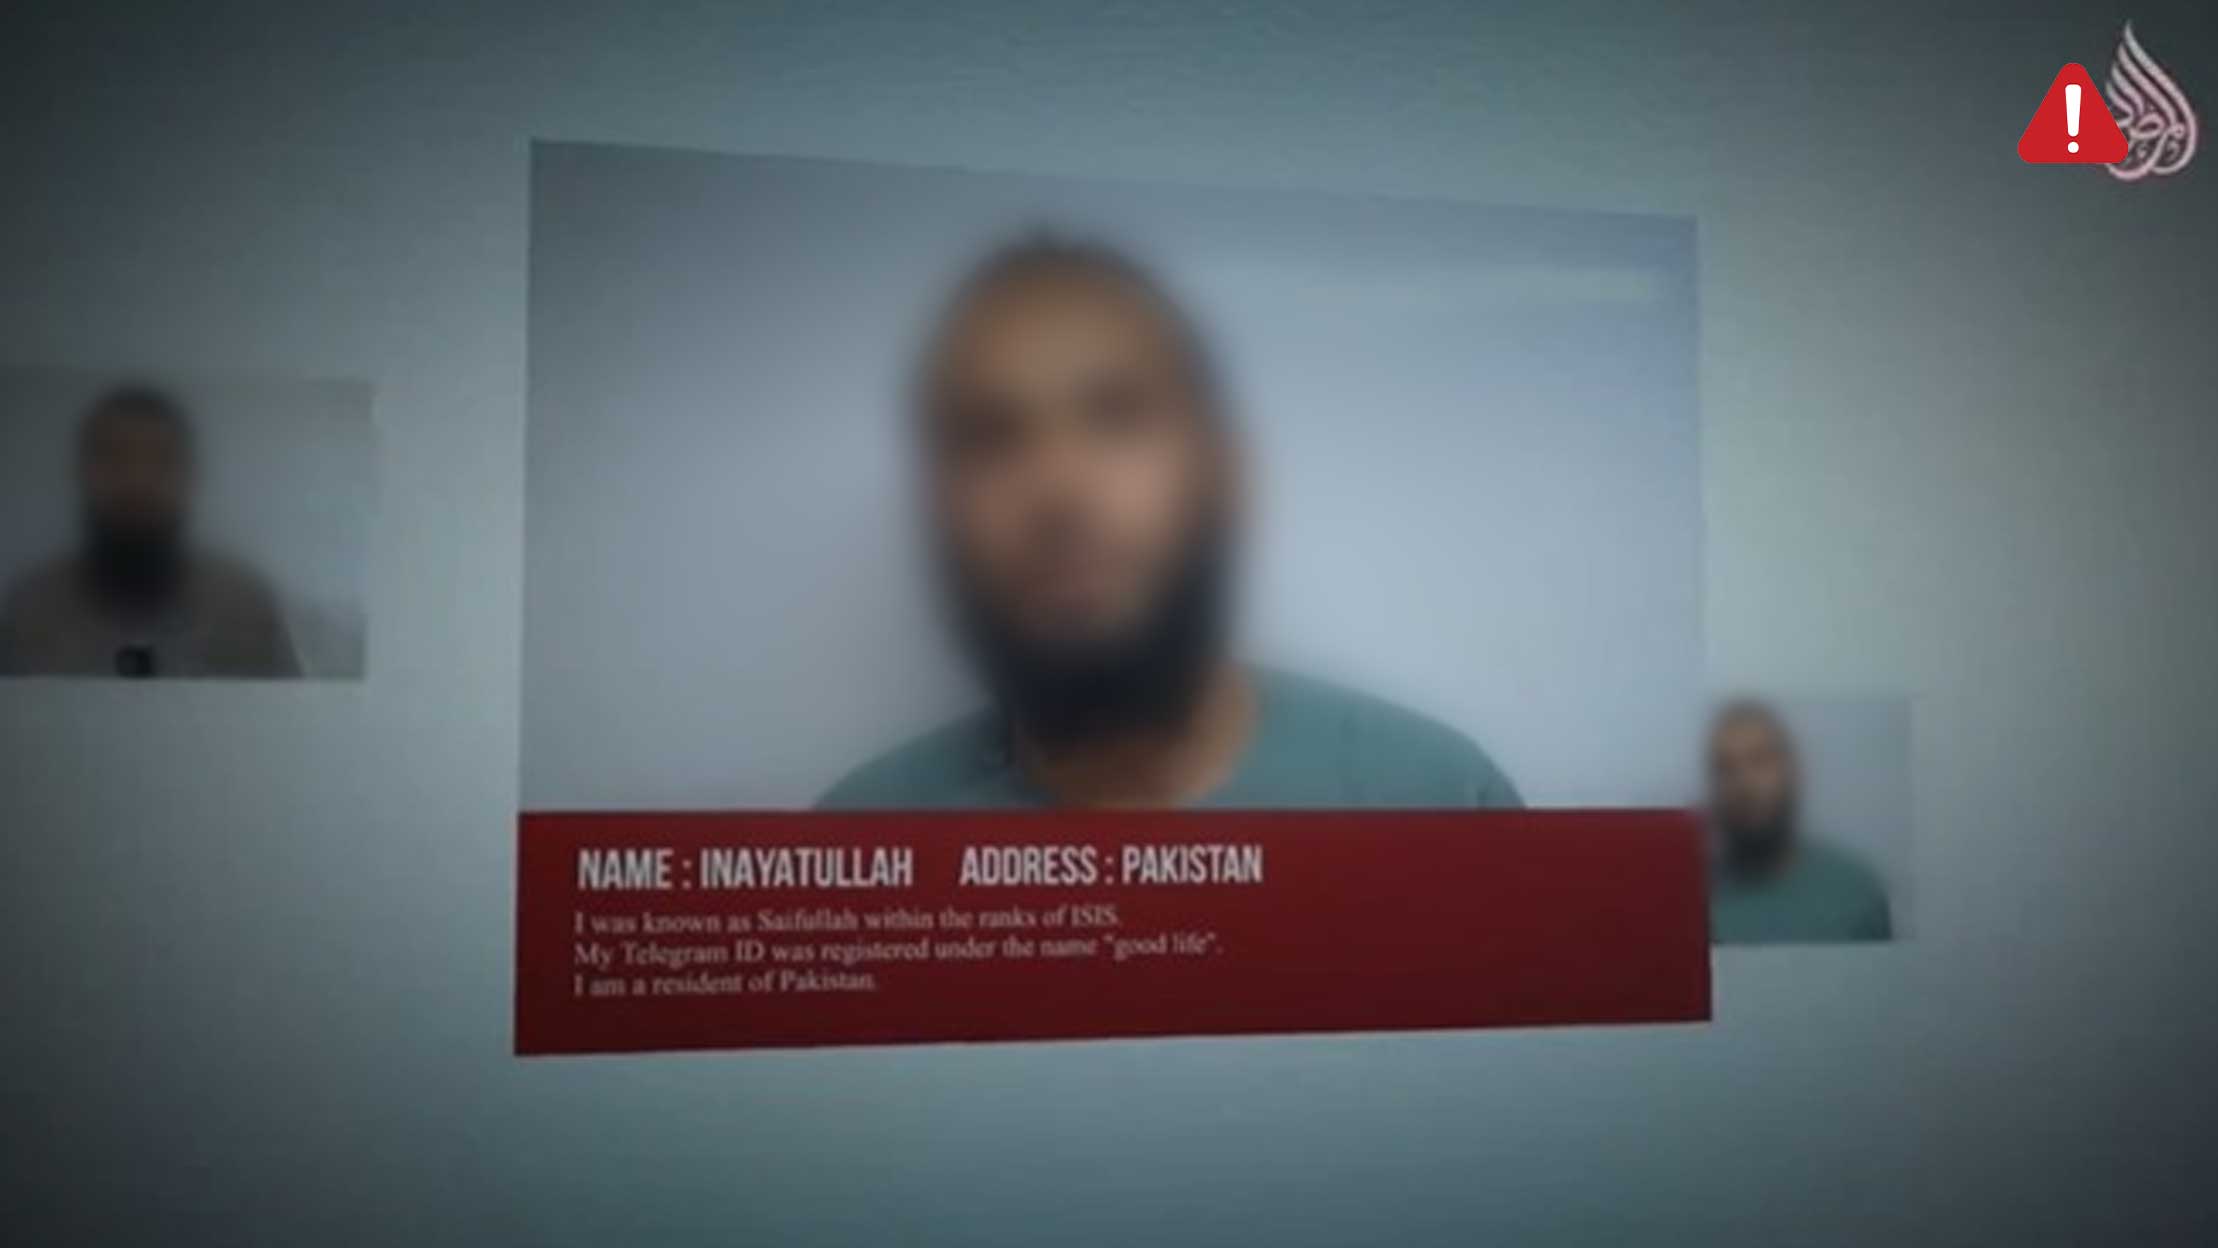 TKD MONITORING: New Video Featuring Arrested ISKP Members from Pakistan Published by Pro-Afghan Taliban Propaganda Mouthpiece, al-Mersaad Media image